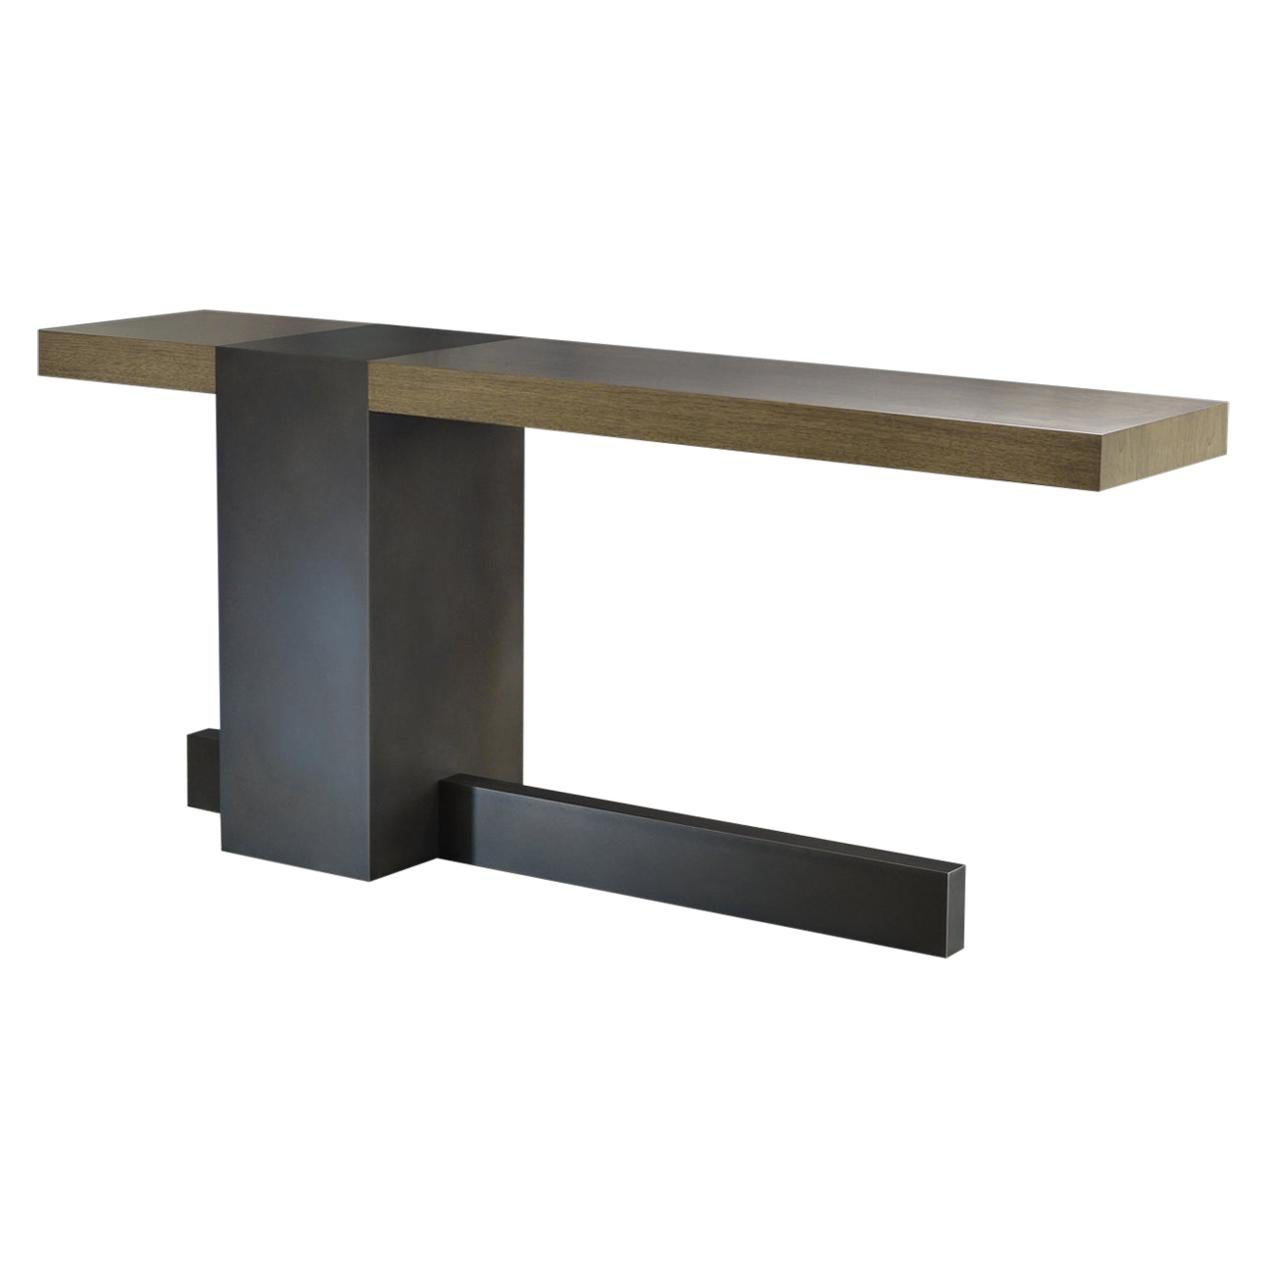 LUMA Design Workshop Float Console in Light Wood and Blackened Metal For Sale